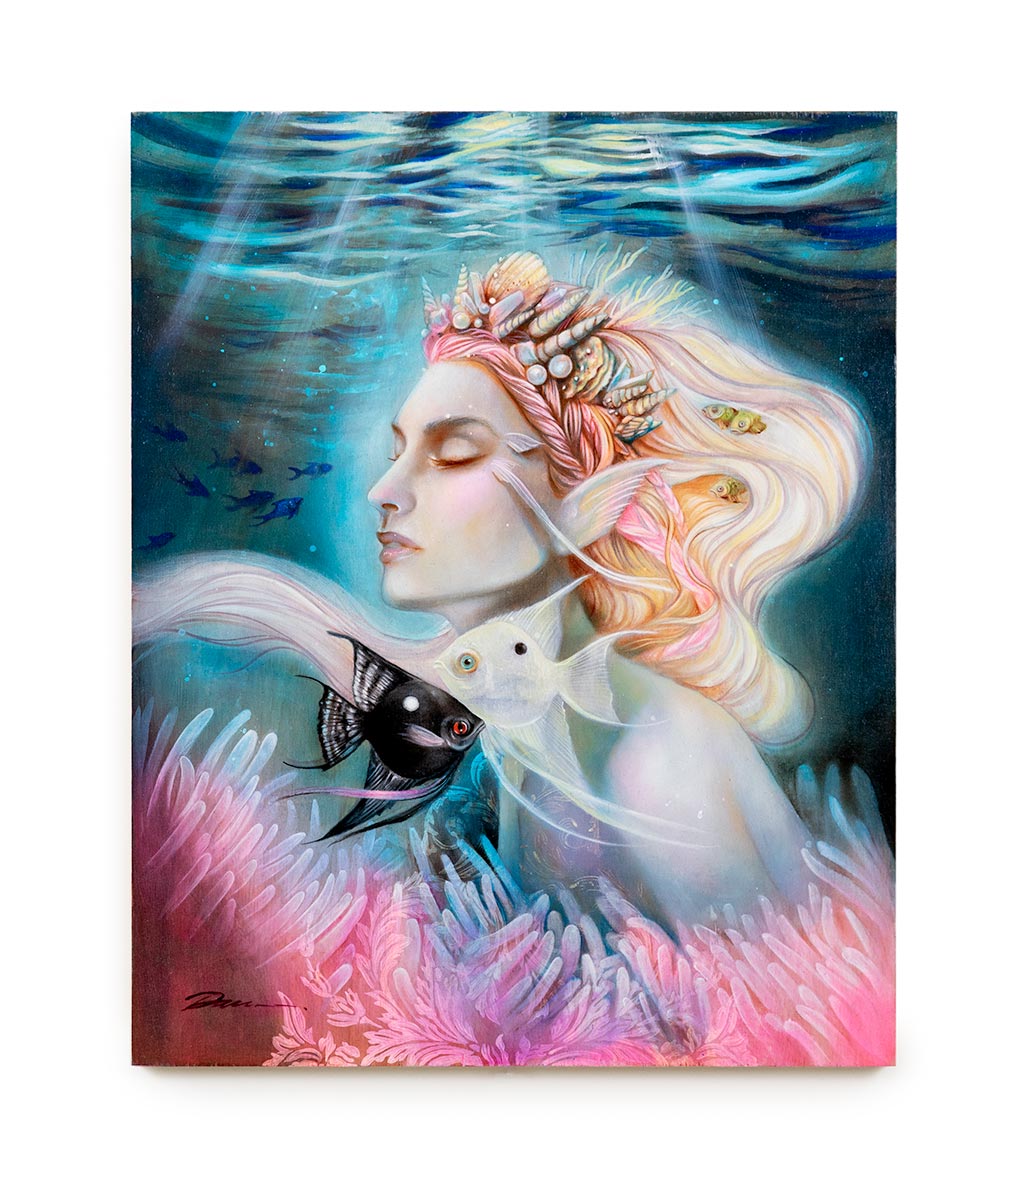 Pisces: Beneath the Waves